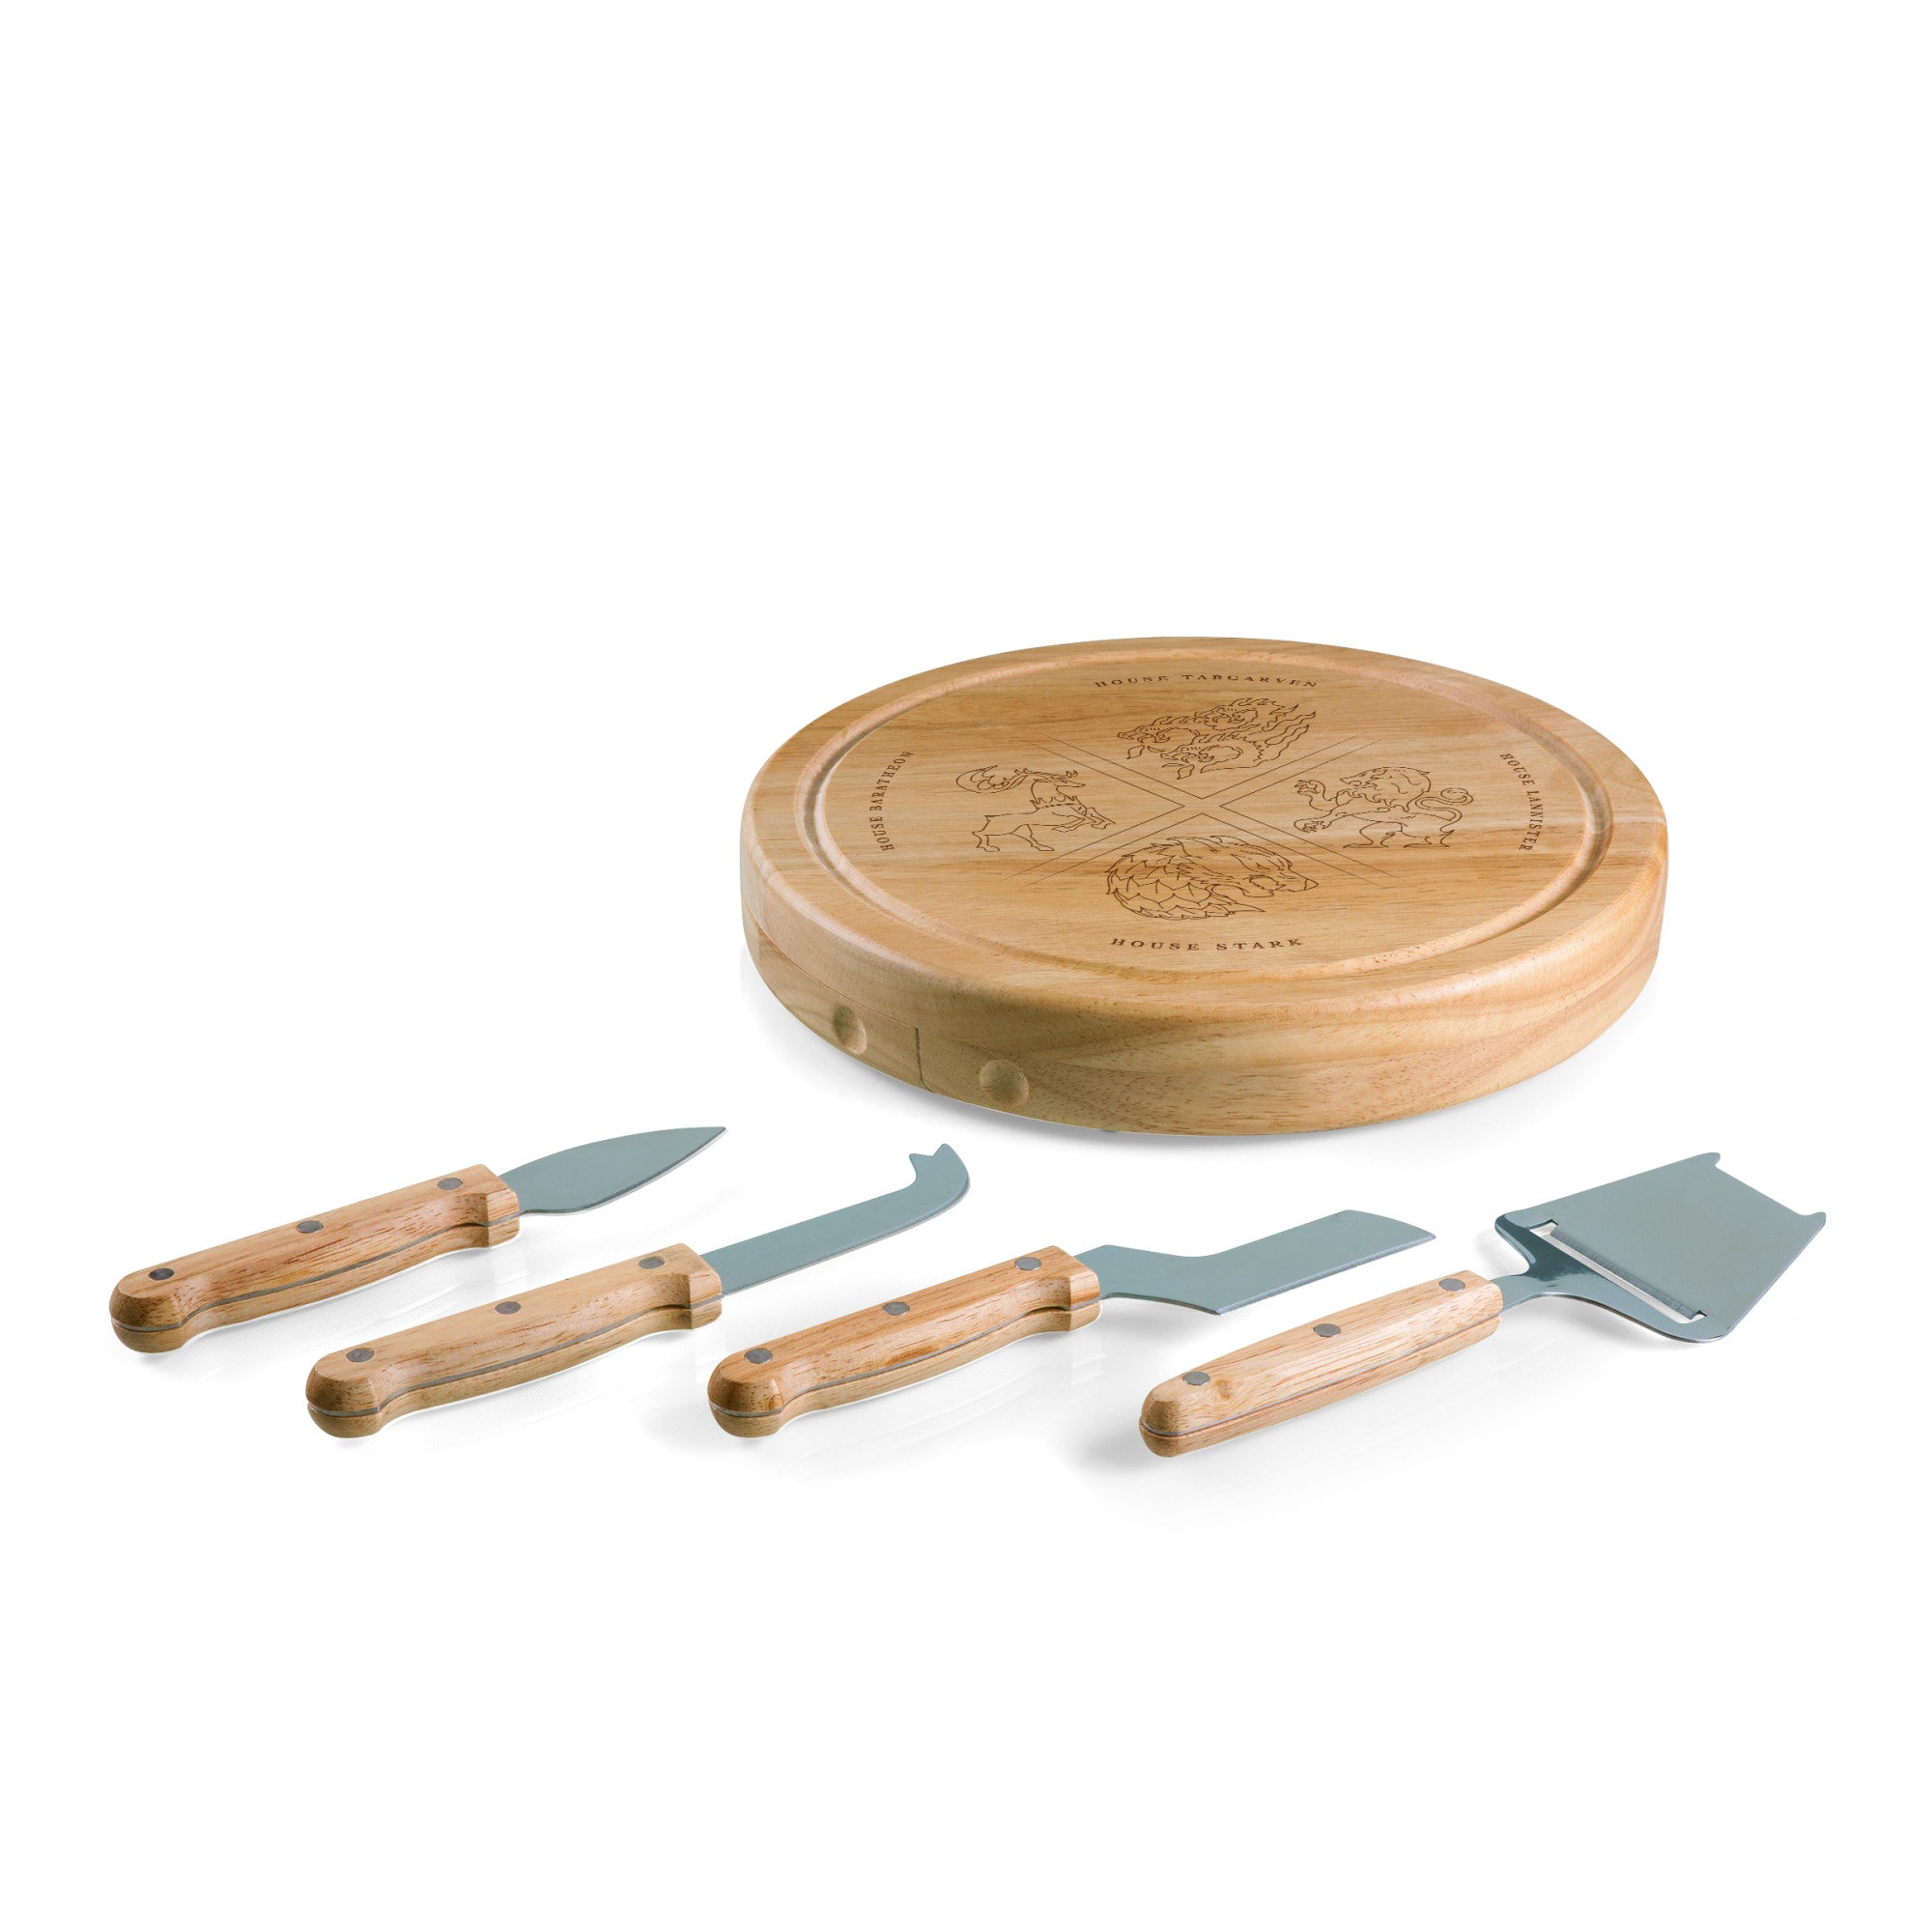 4 Houses - Game of Thrones - Circo Cheese Cutting Board & Tools Set